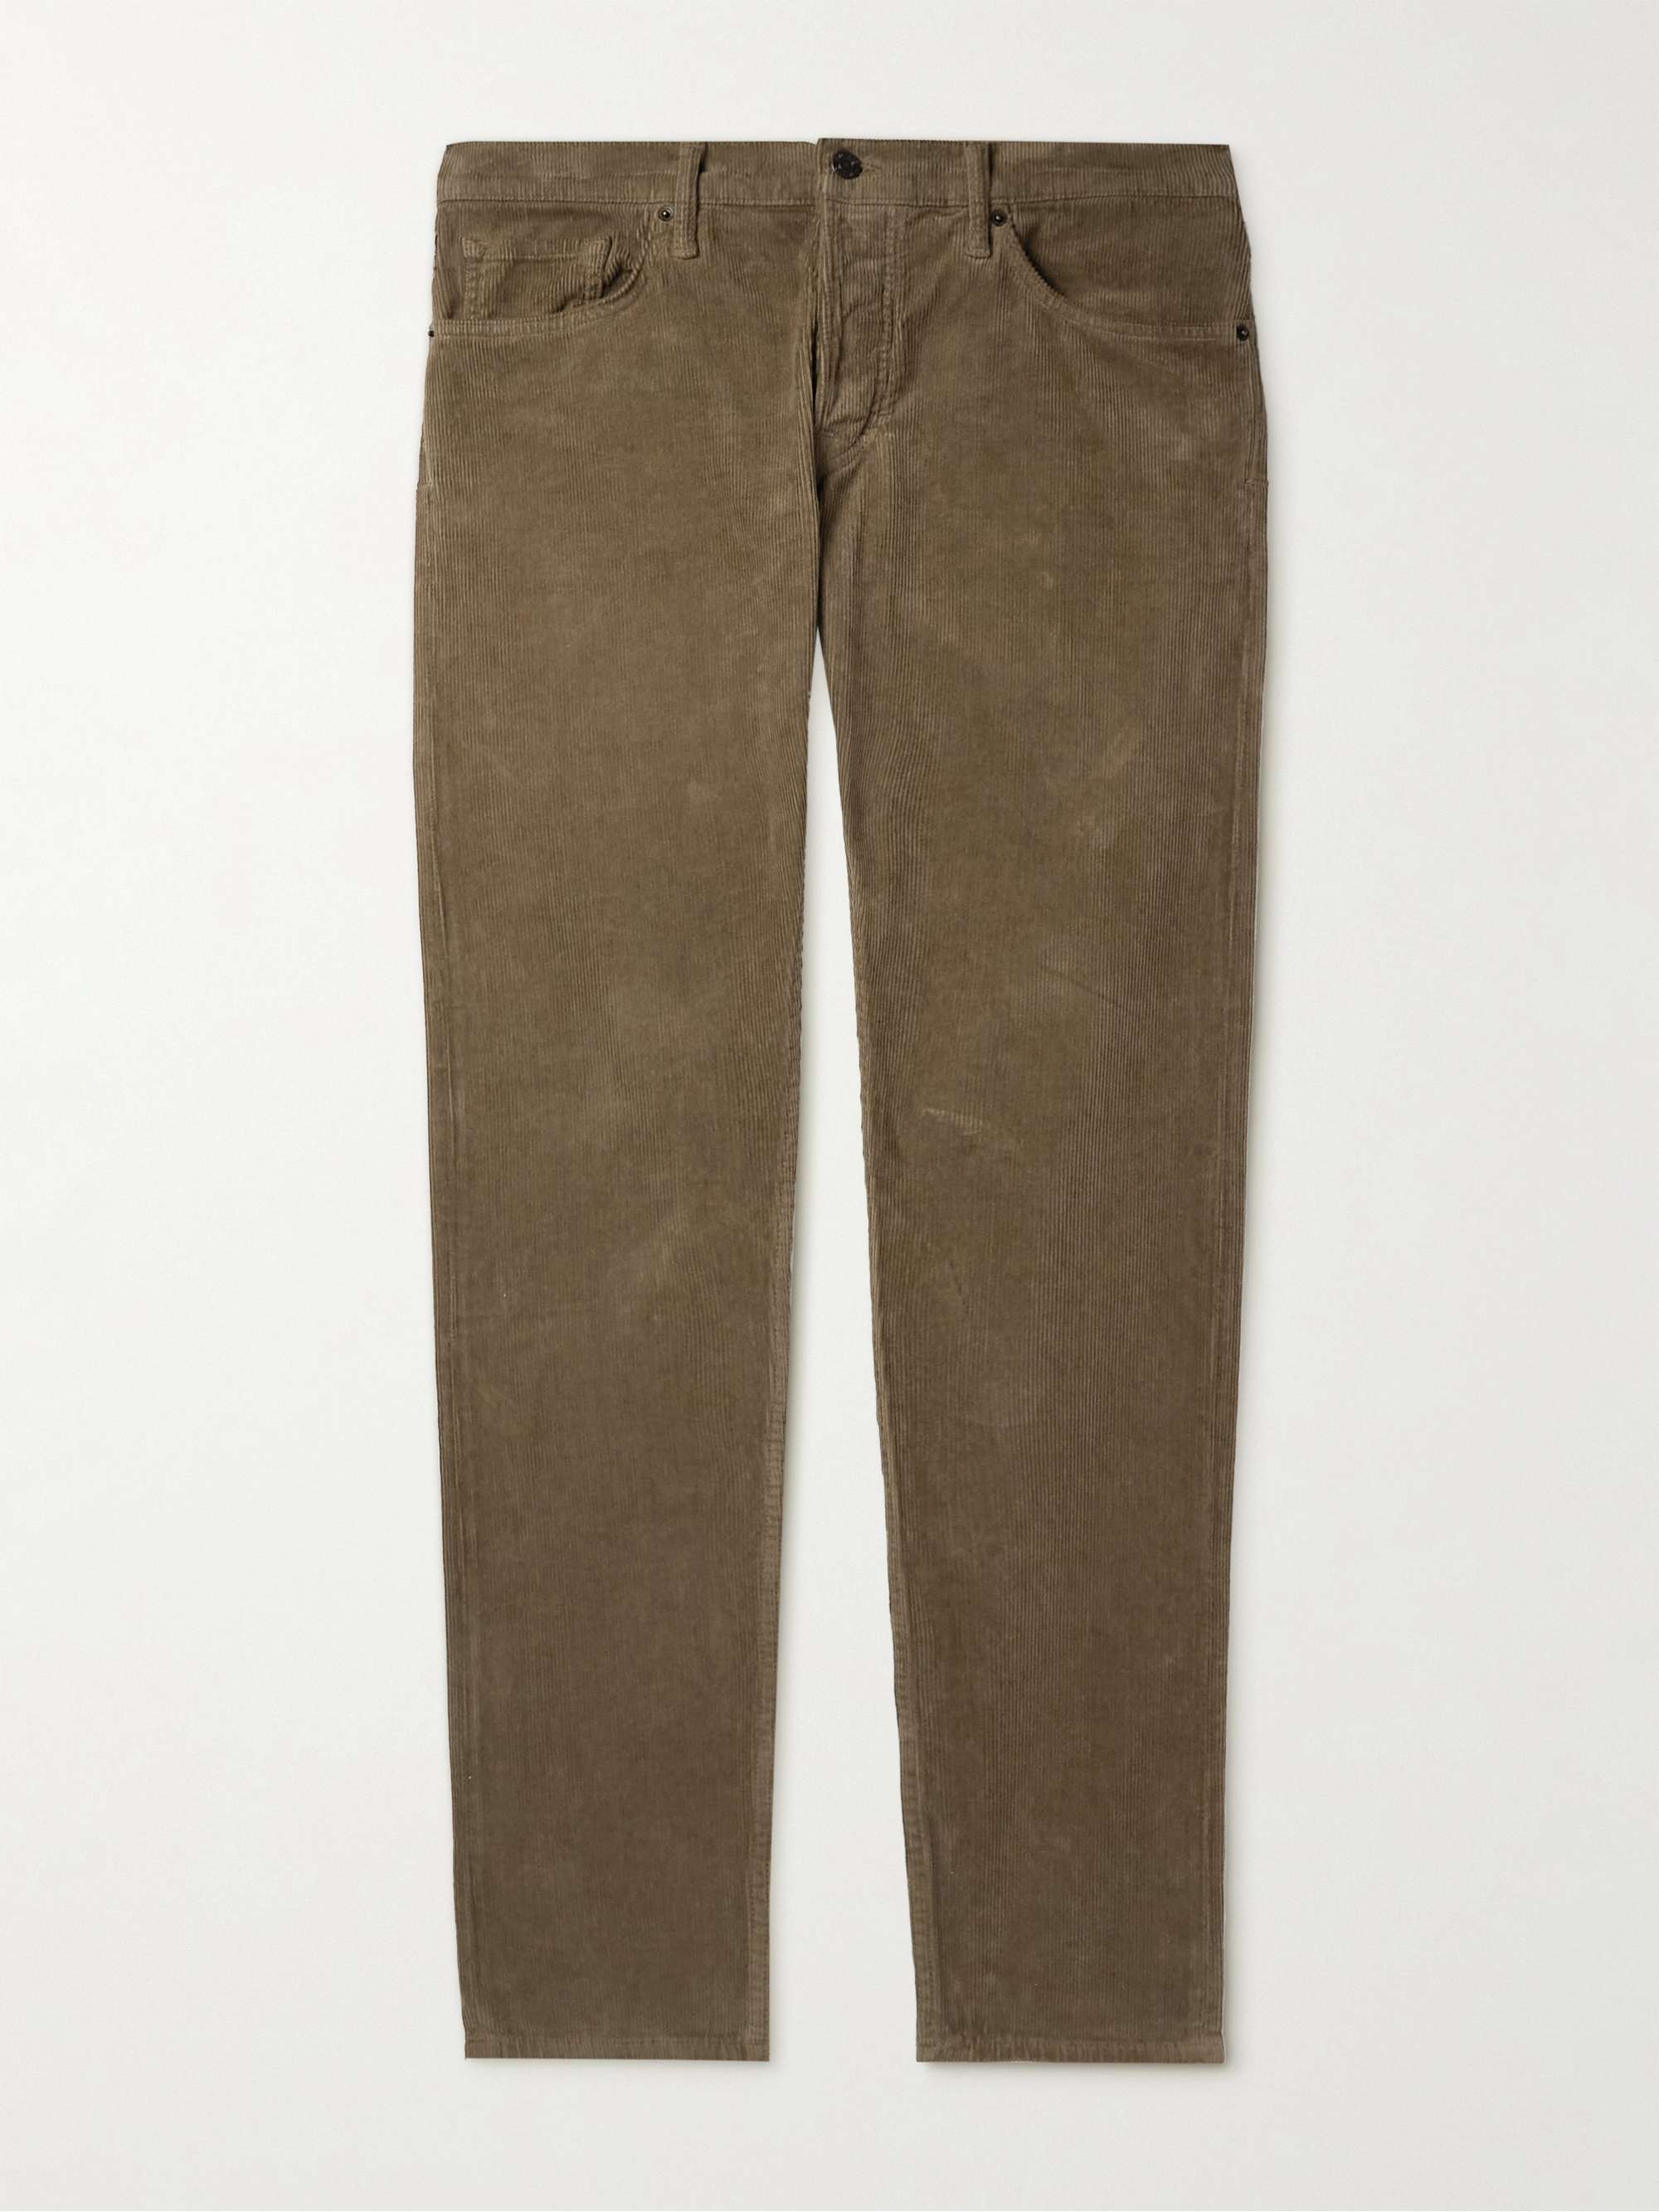 TOM FORD 12 Waves Cord Slim-Fit Cotton-Blend Corduroy Trousers